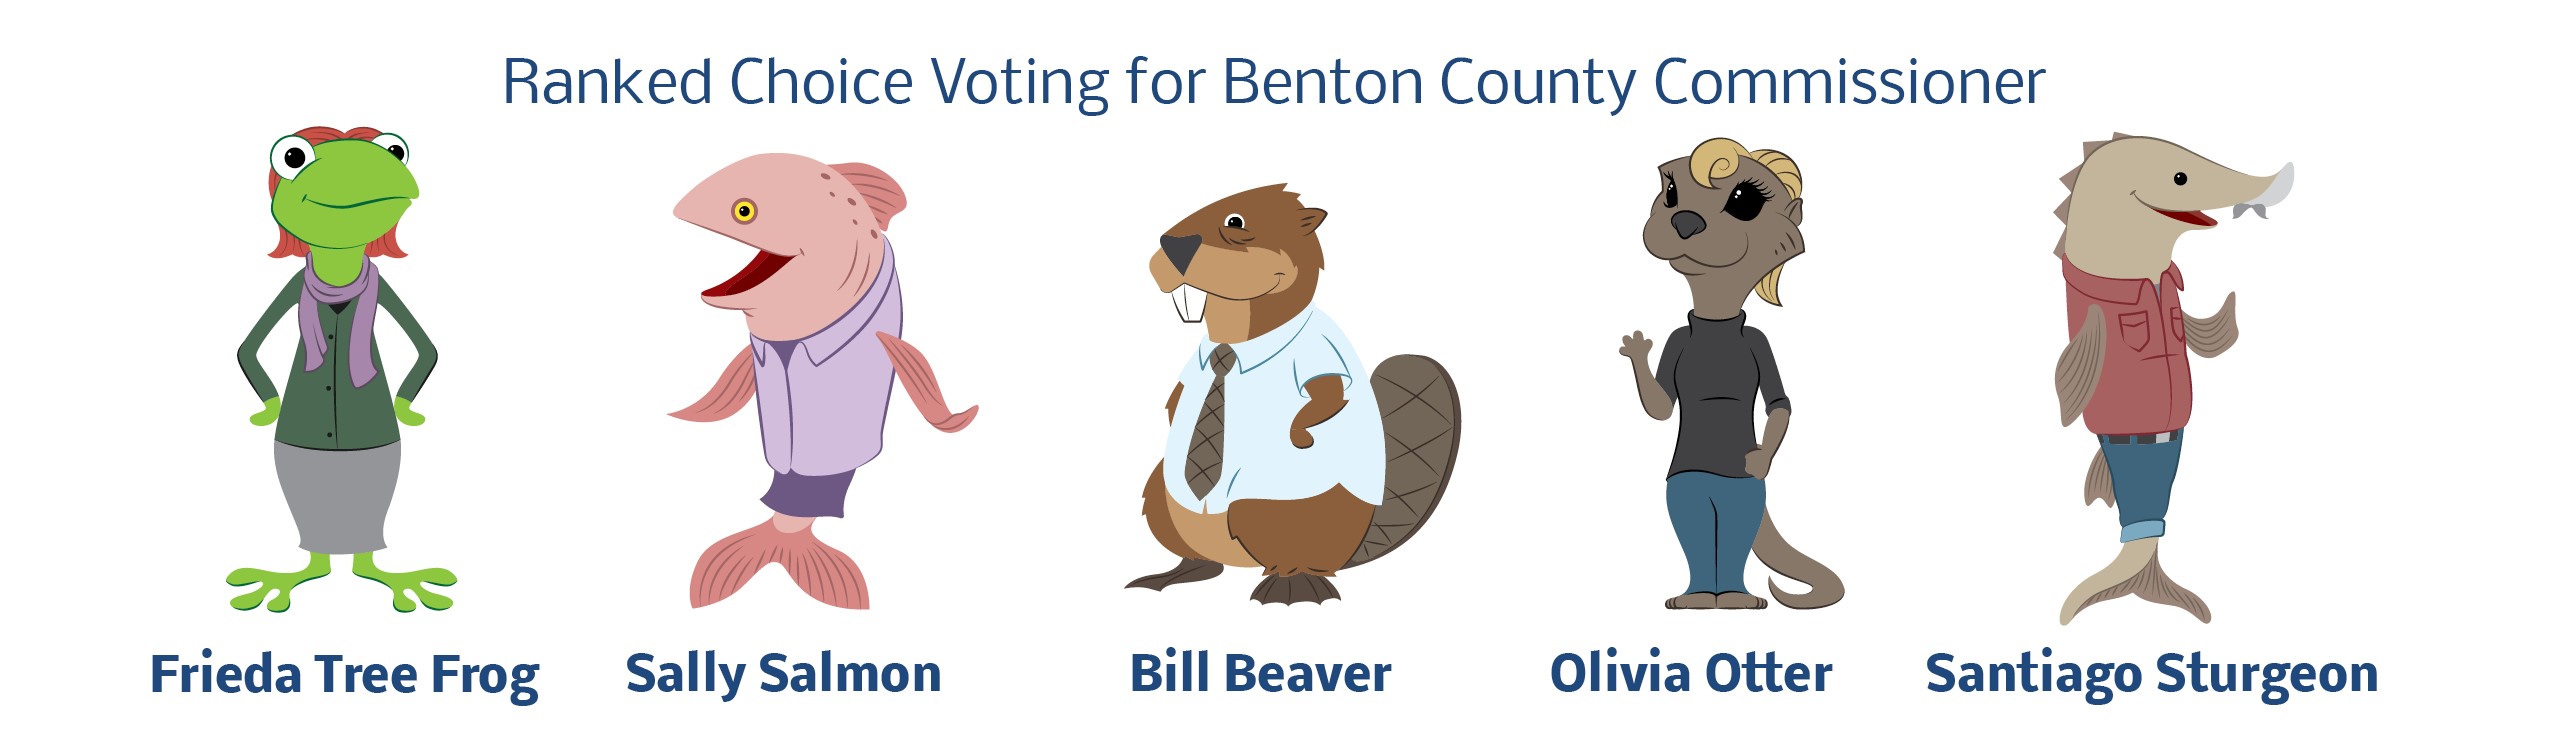 Ranked Choice Voting for Benton County Commissioner